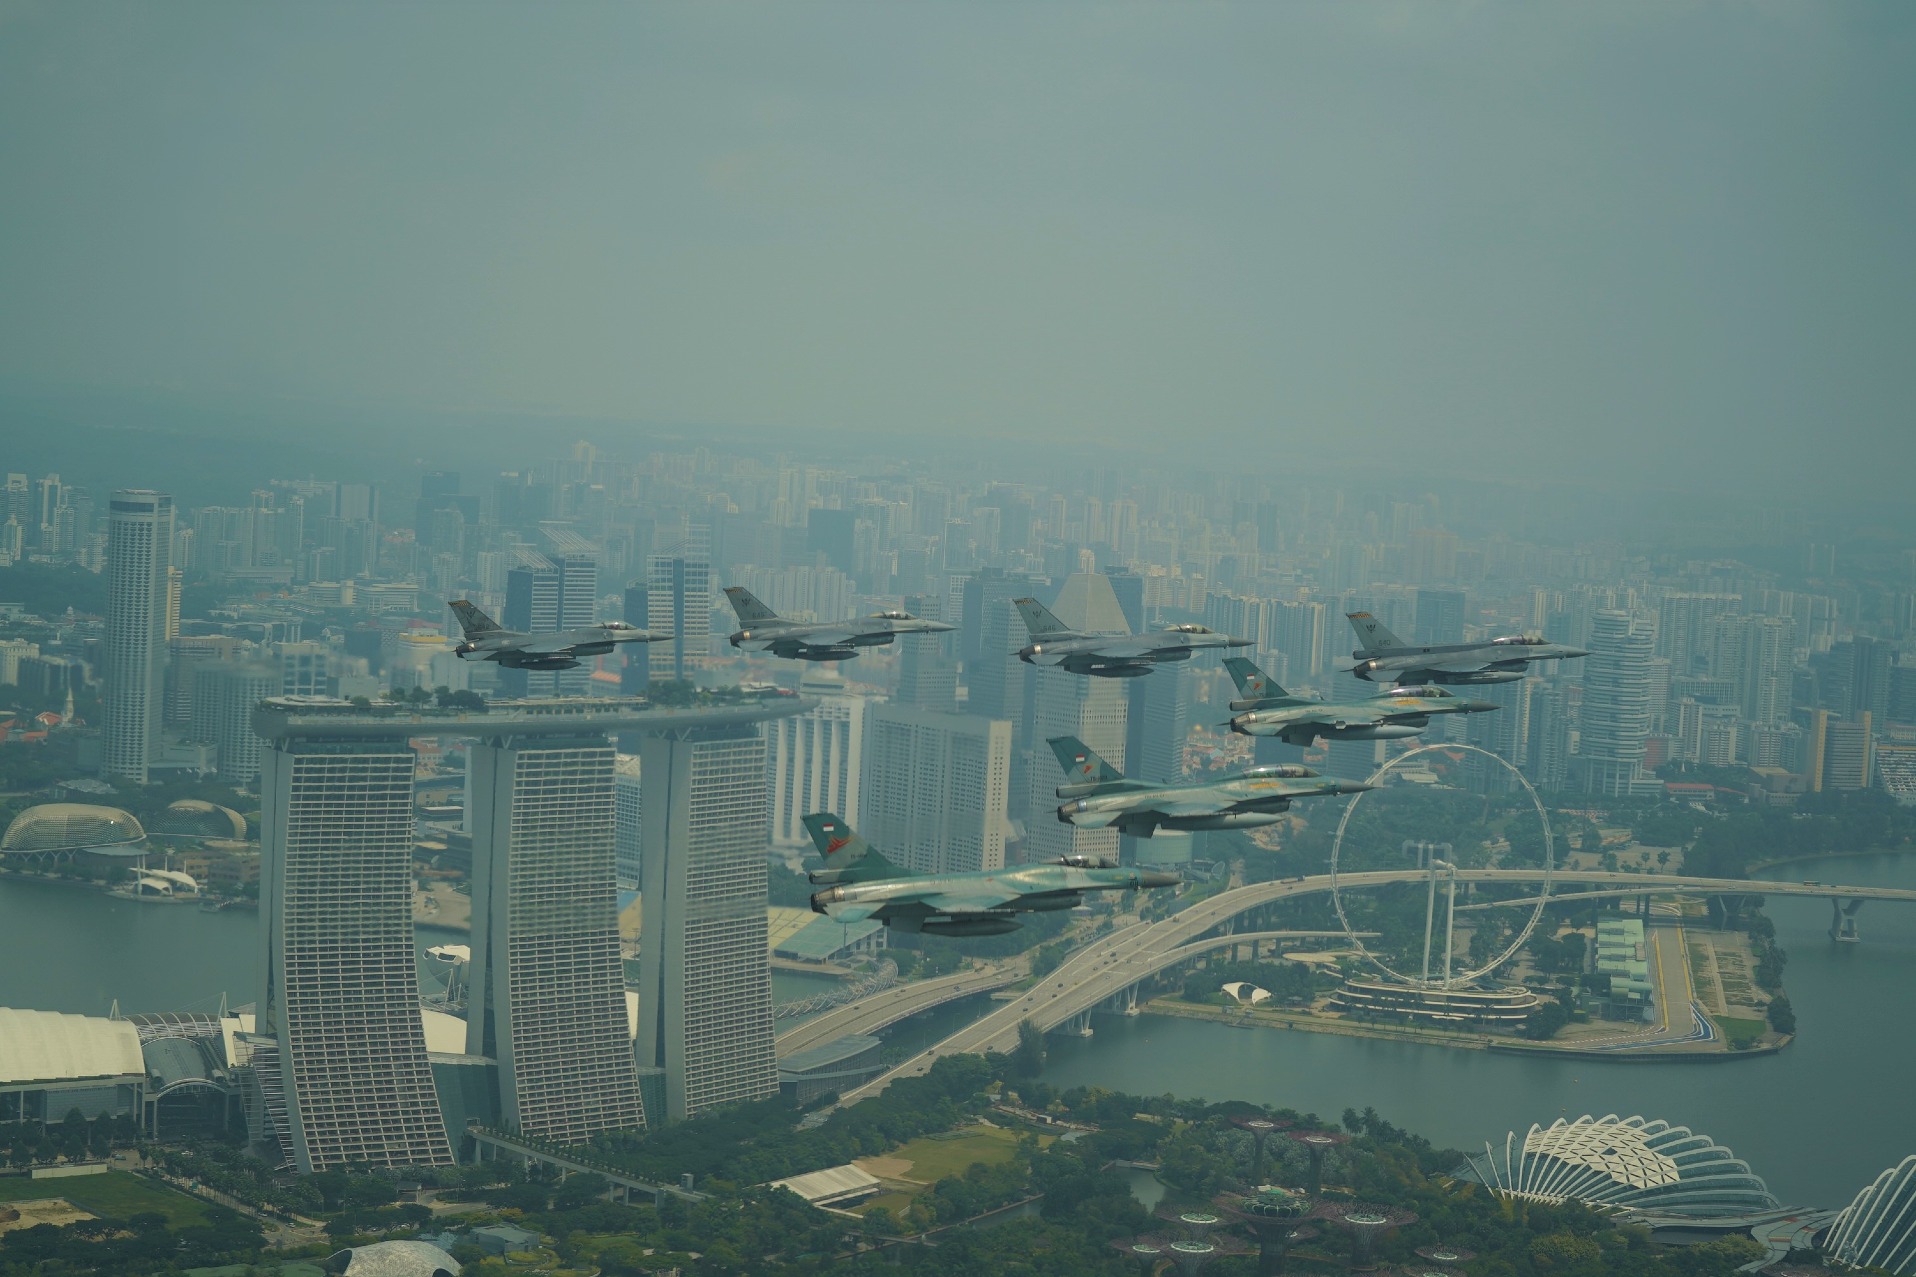 The Republic of Singapore Air Force (RSAF) and the Indonesian Air Force (TNI AU)'s F-16 aircraft flying in formation over Marina Bay Sands in Singapore.